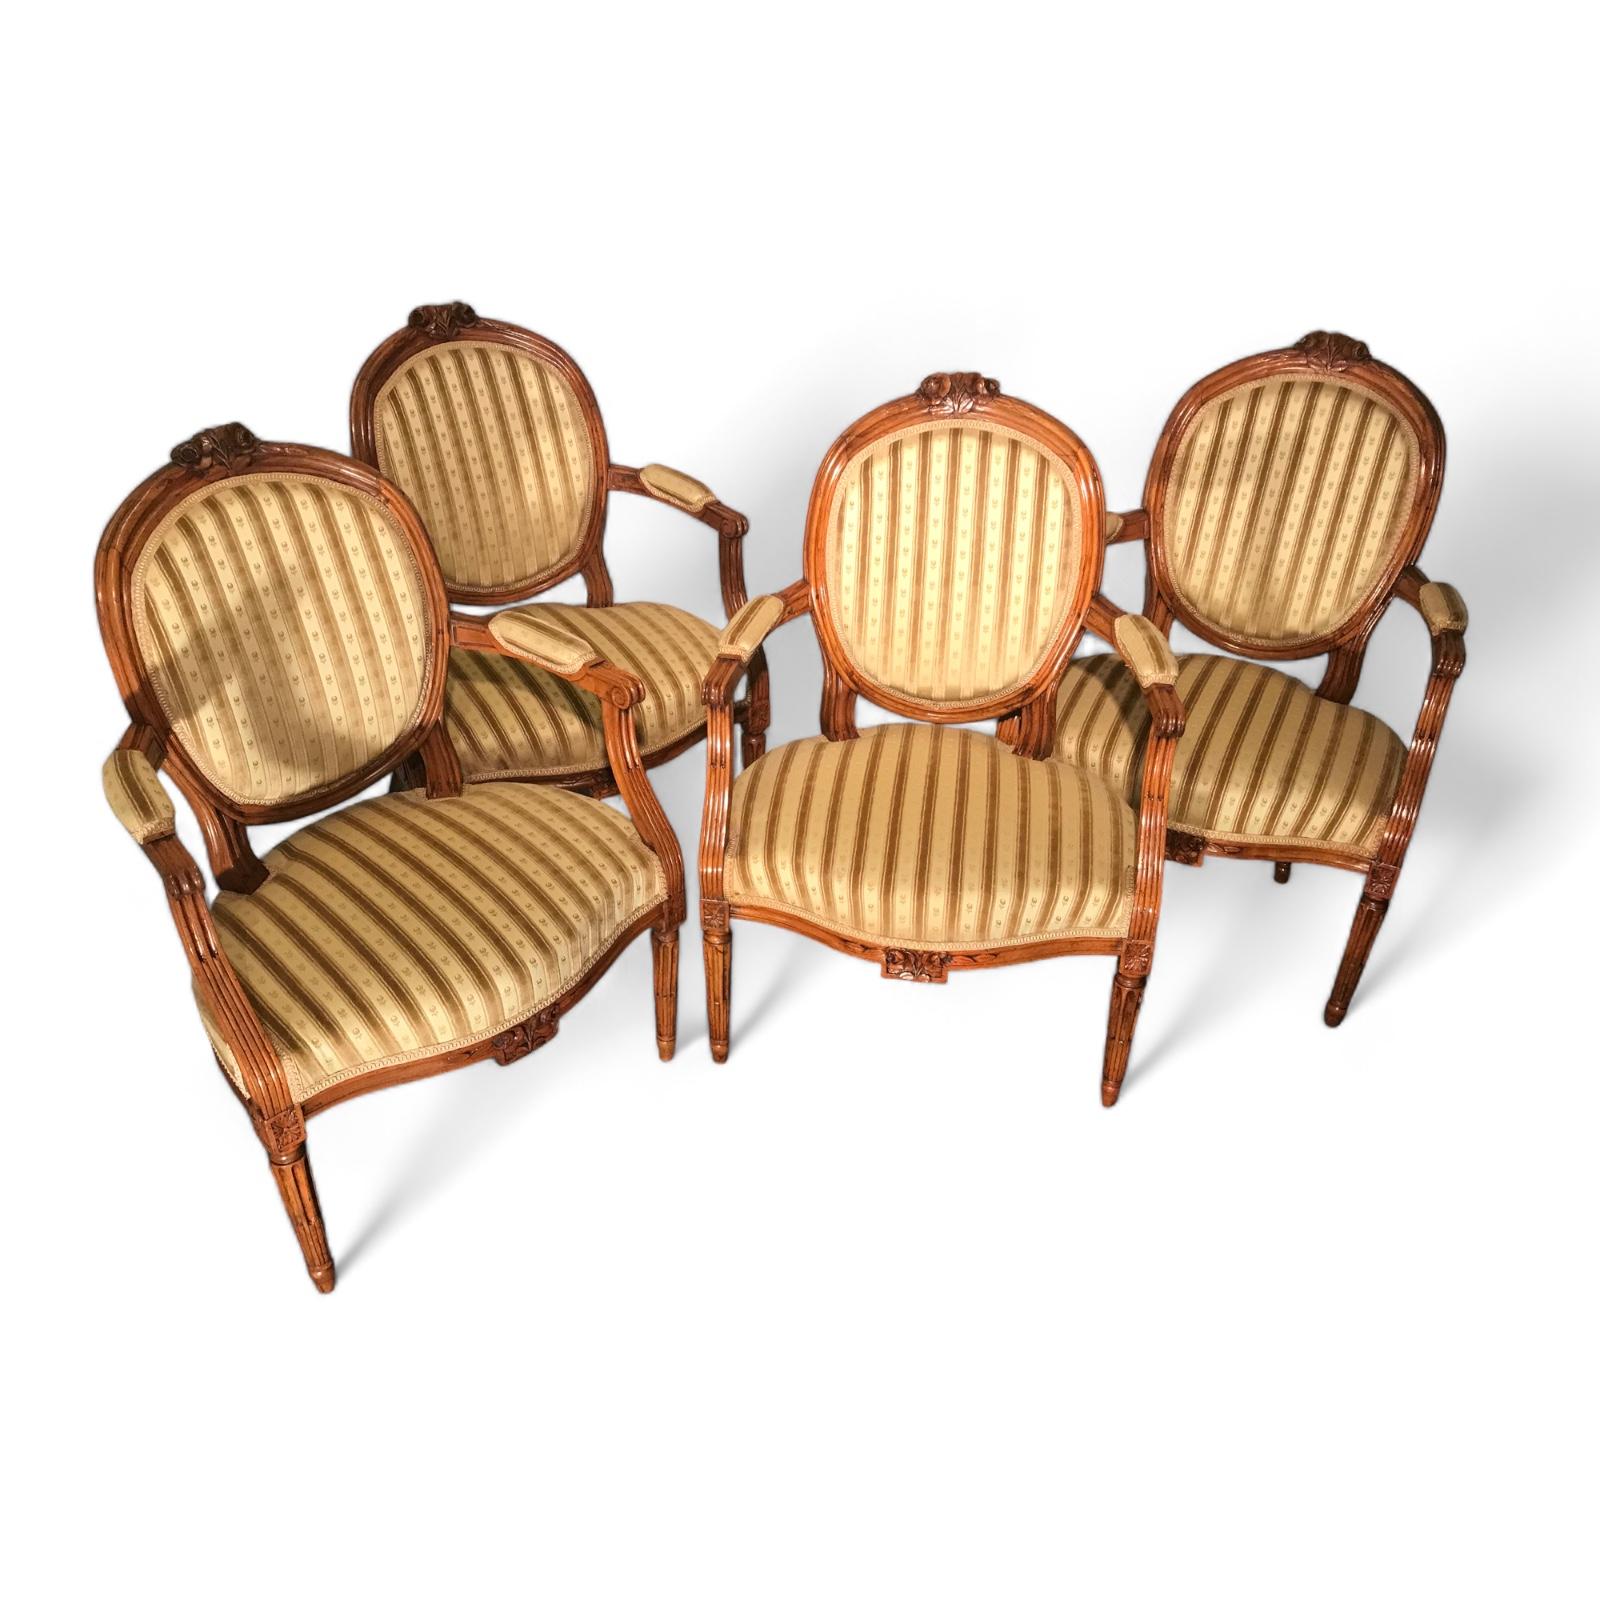 Dating back to 1780, this set of four Louis XVI armchairs exudes timeless elegance and classic sophistication. Each chair features an oval-shaped back adorned with intricate floral motifs at the center, evoking the charm of the Louis XVI era. The